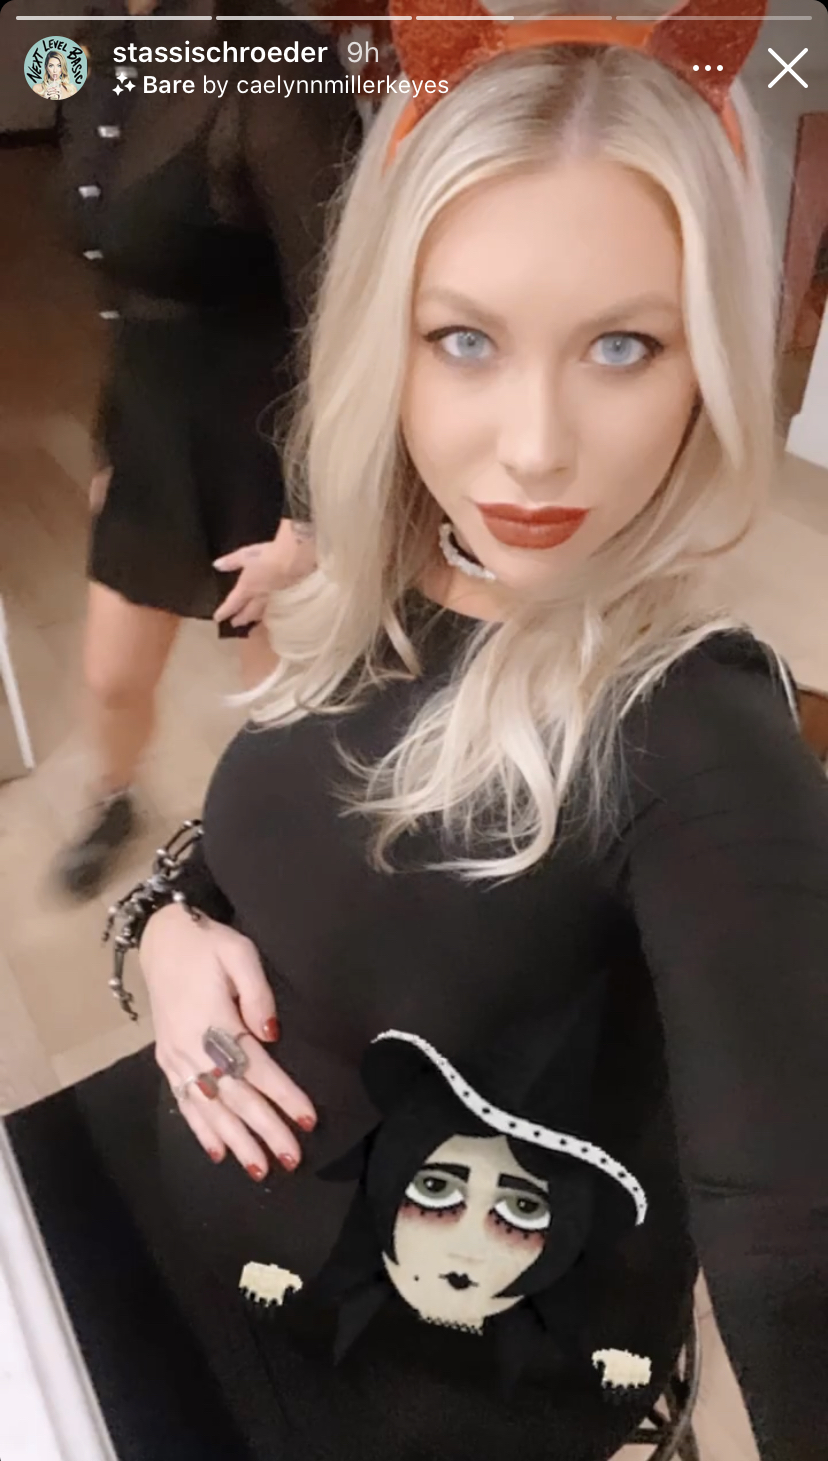 Stassi Schroeder shows off her baby bump while dressed like a witch.